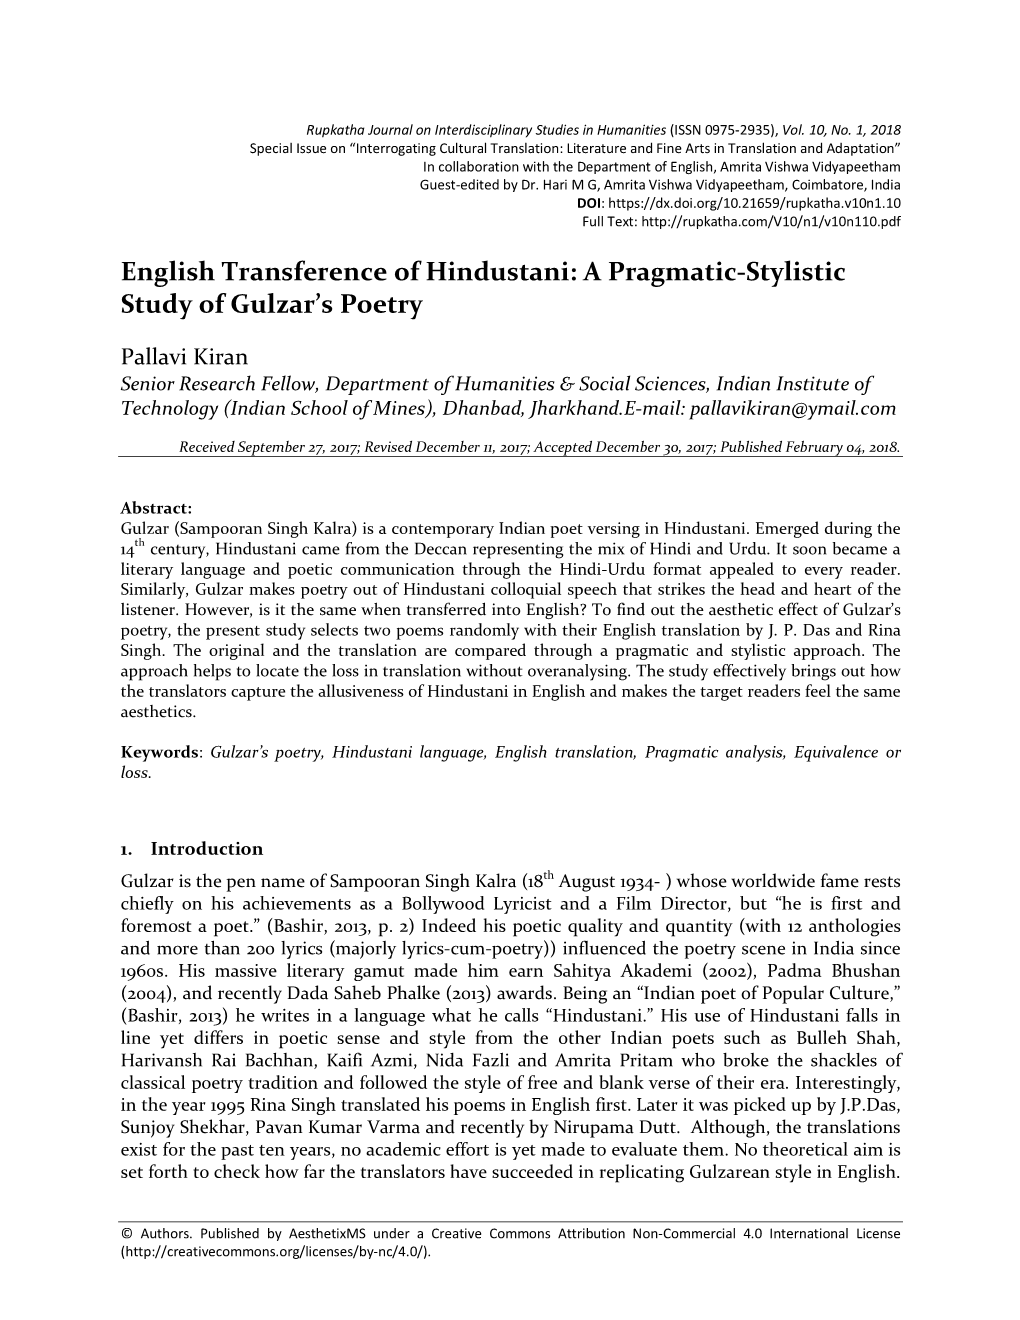 English Transference of Hindustani: a Pragmatic-Stylistic Study of Gulzar's Poetry